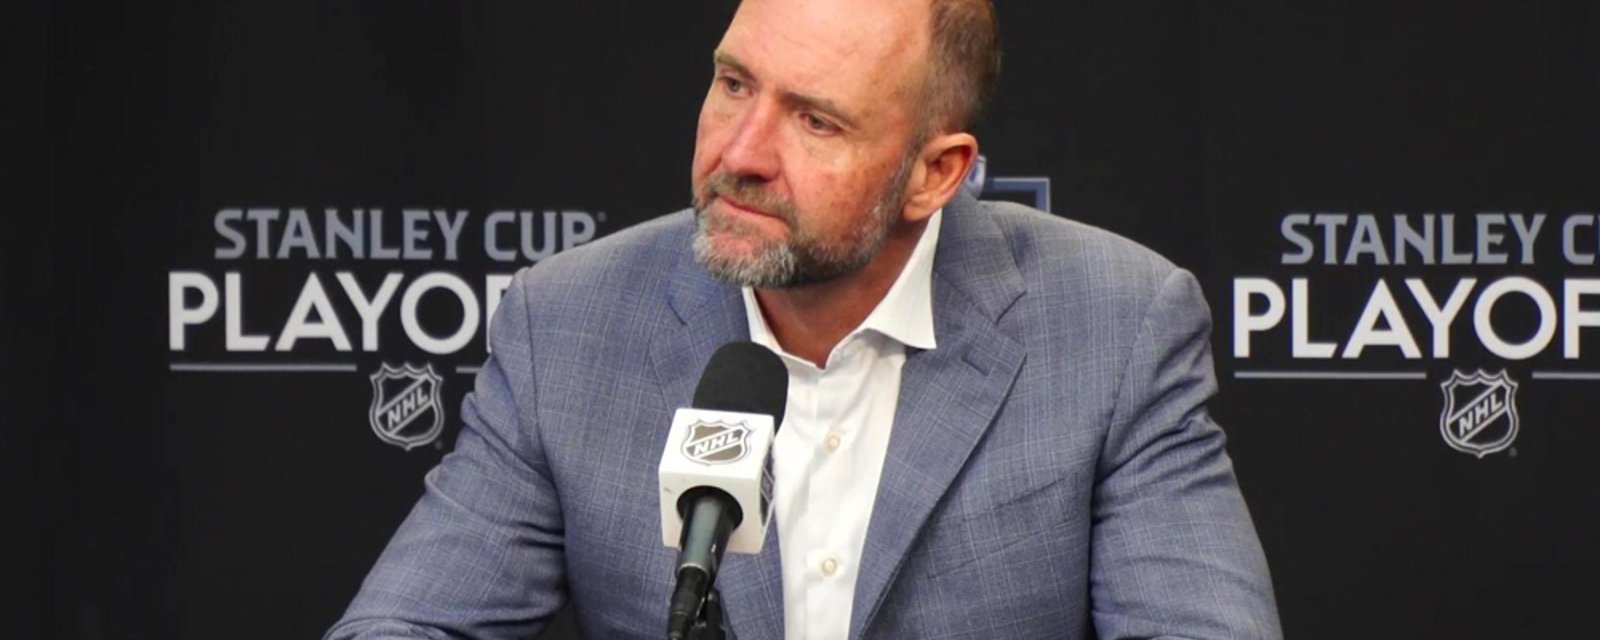 Coach DeBoer with a classy gesture towards Vegas following Game 6 loss